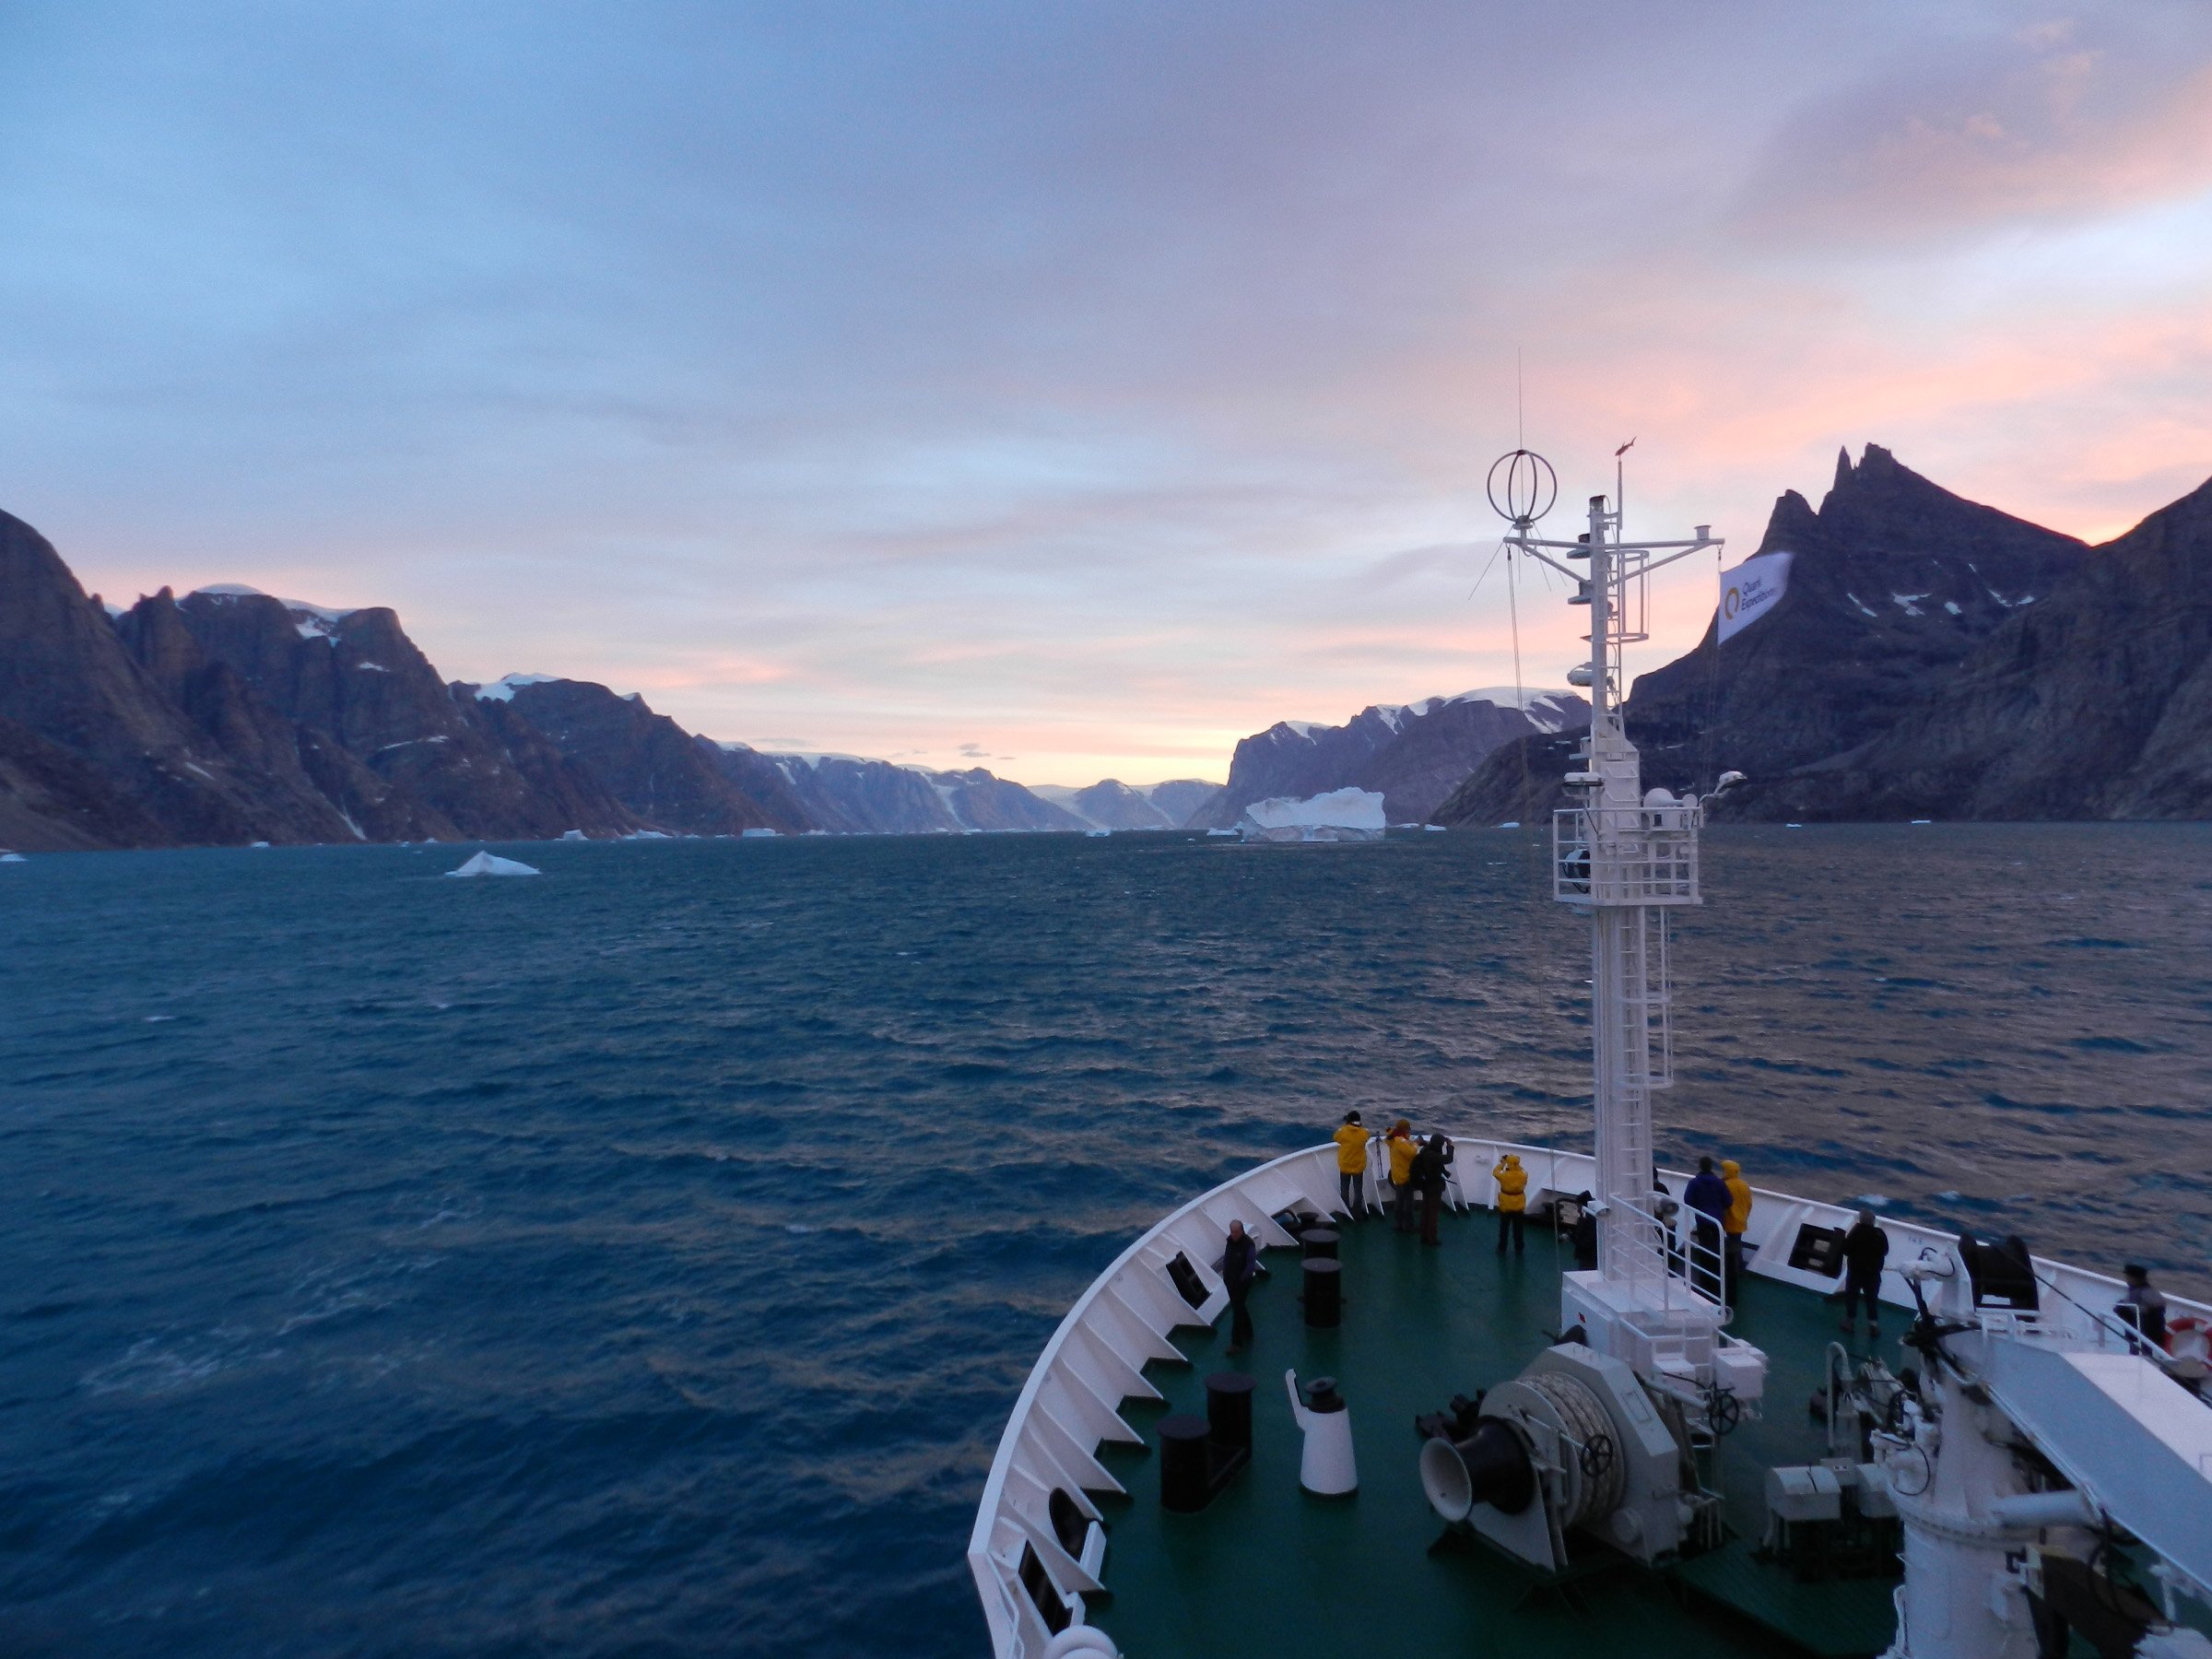 Scoresby Sound in East Greenland is the largest fjord system in the world.